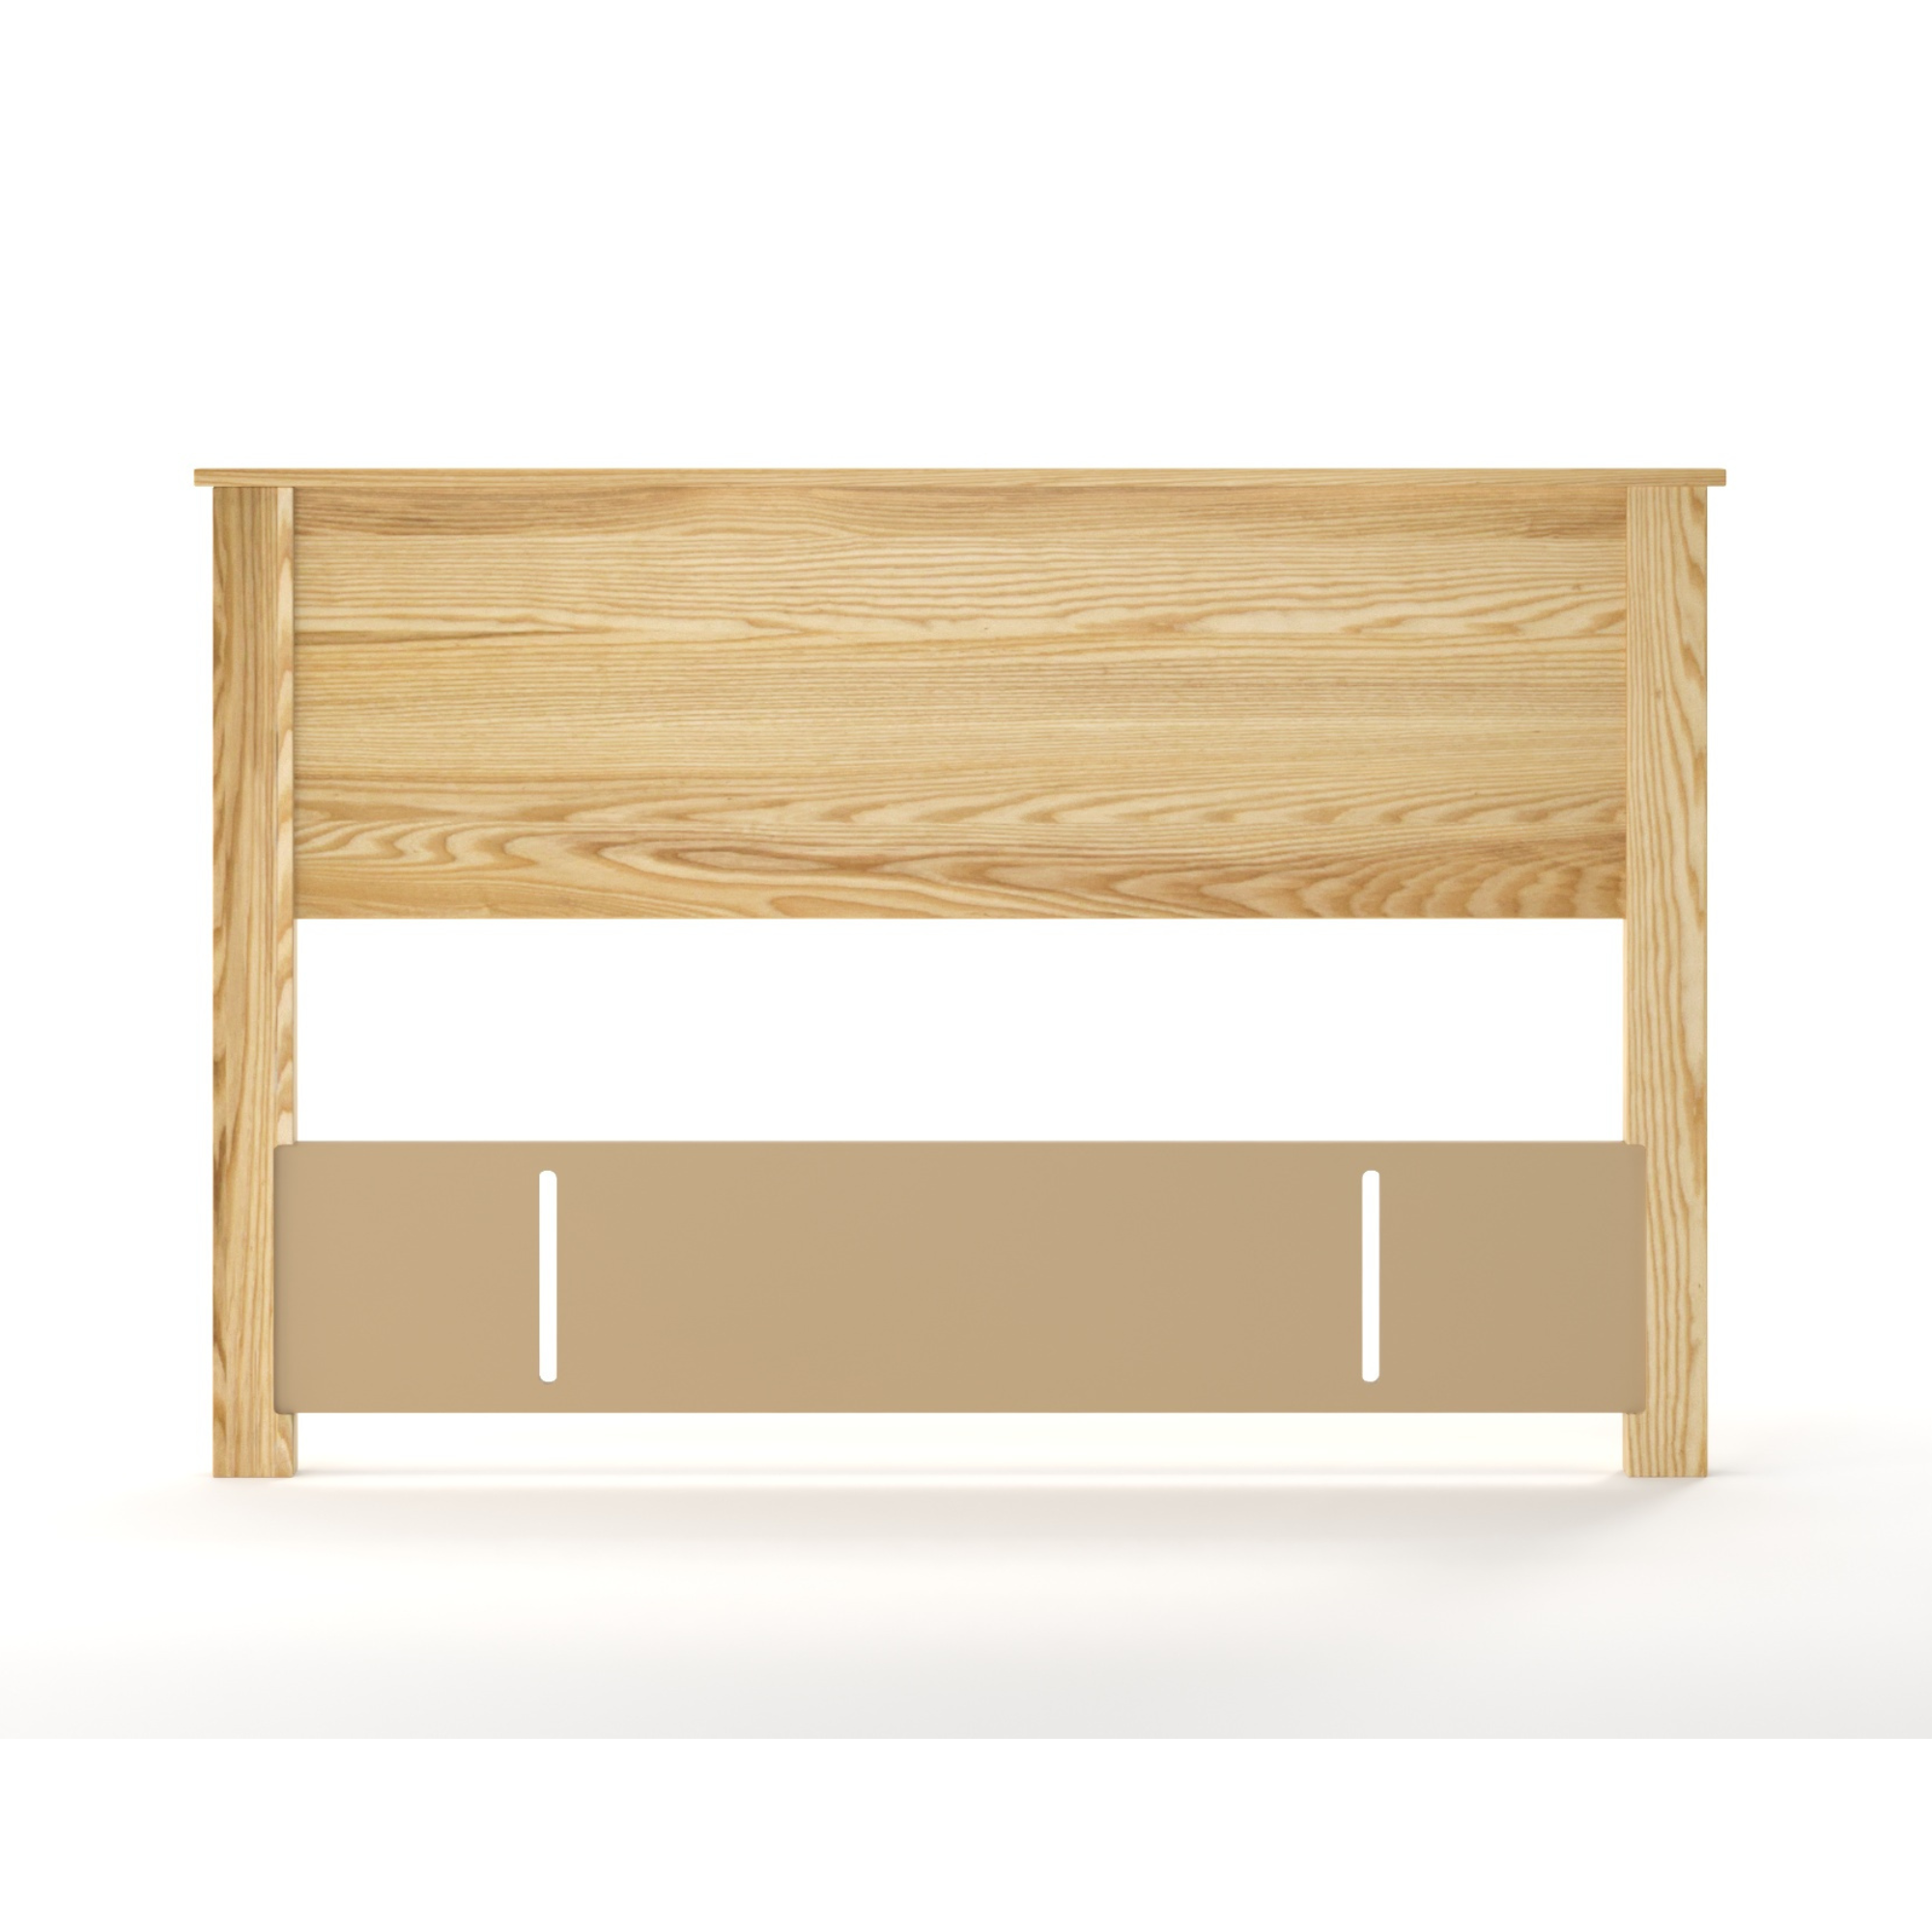 IVYDALE PANEL OR SLATTED HEADBOARD | PINE OR AMERICAN ASH | ALL SIZES |NZ MADE